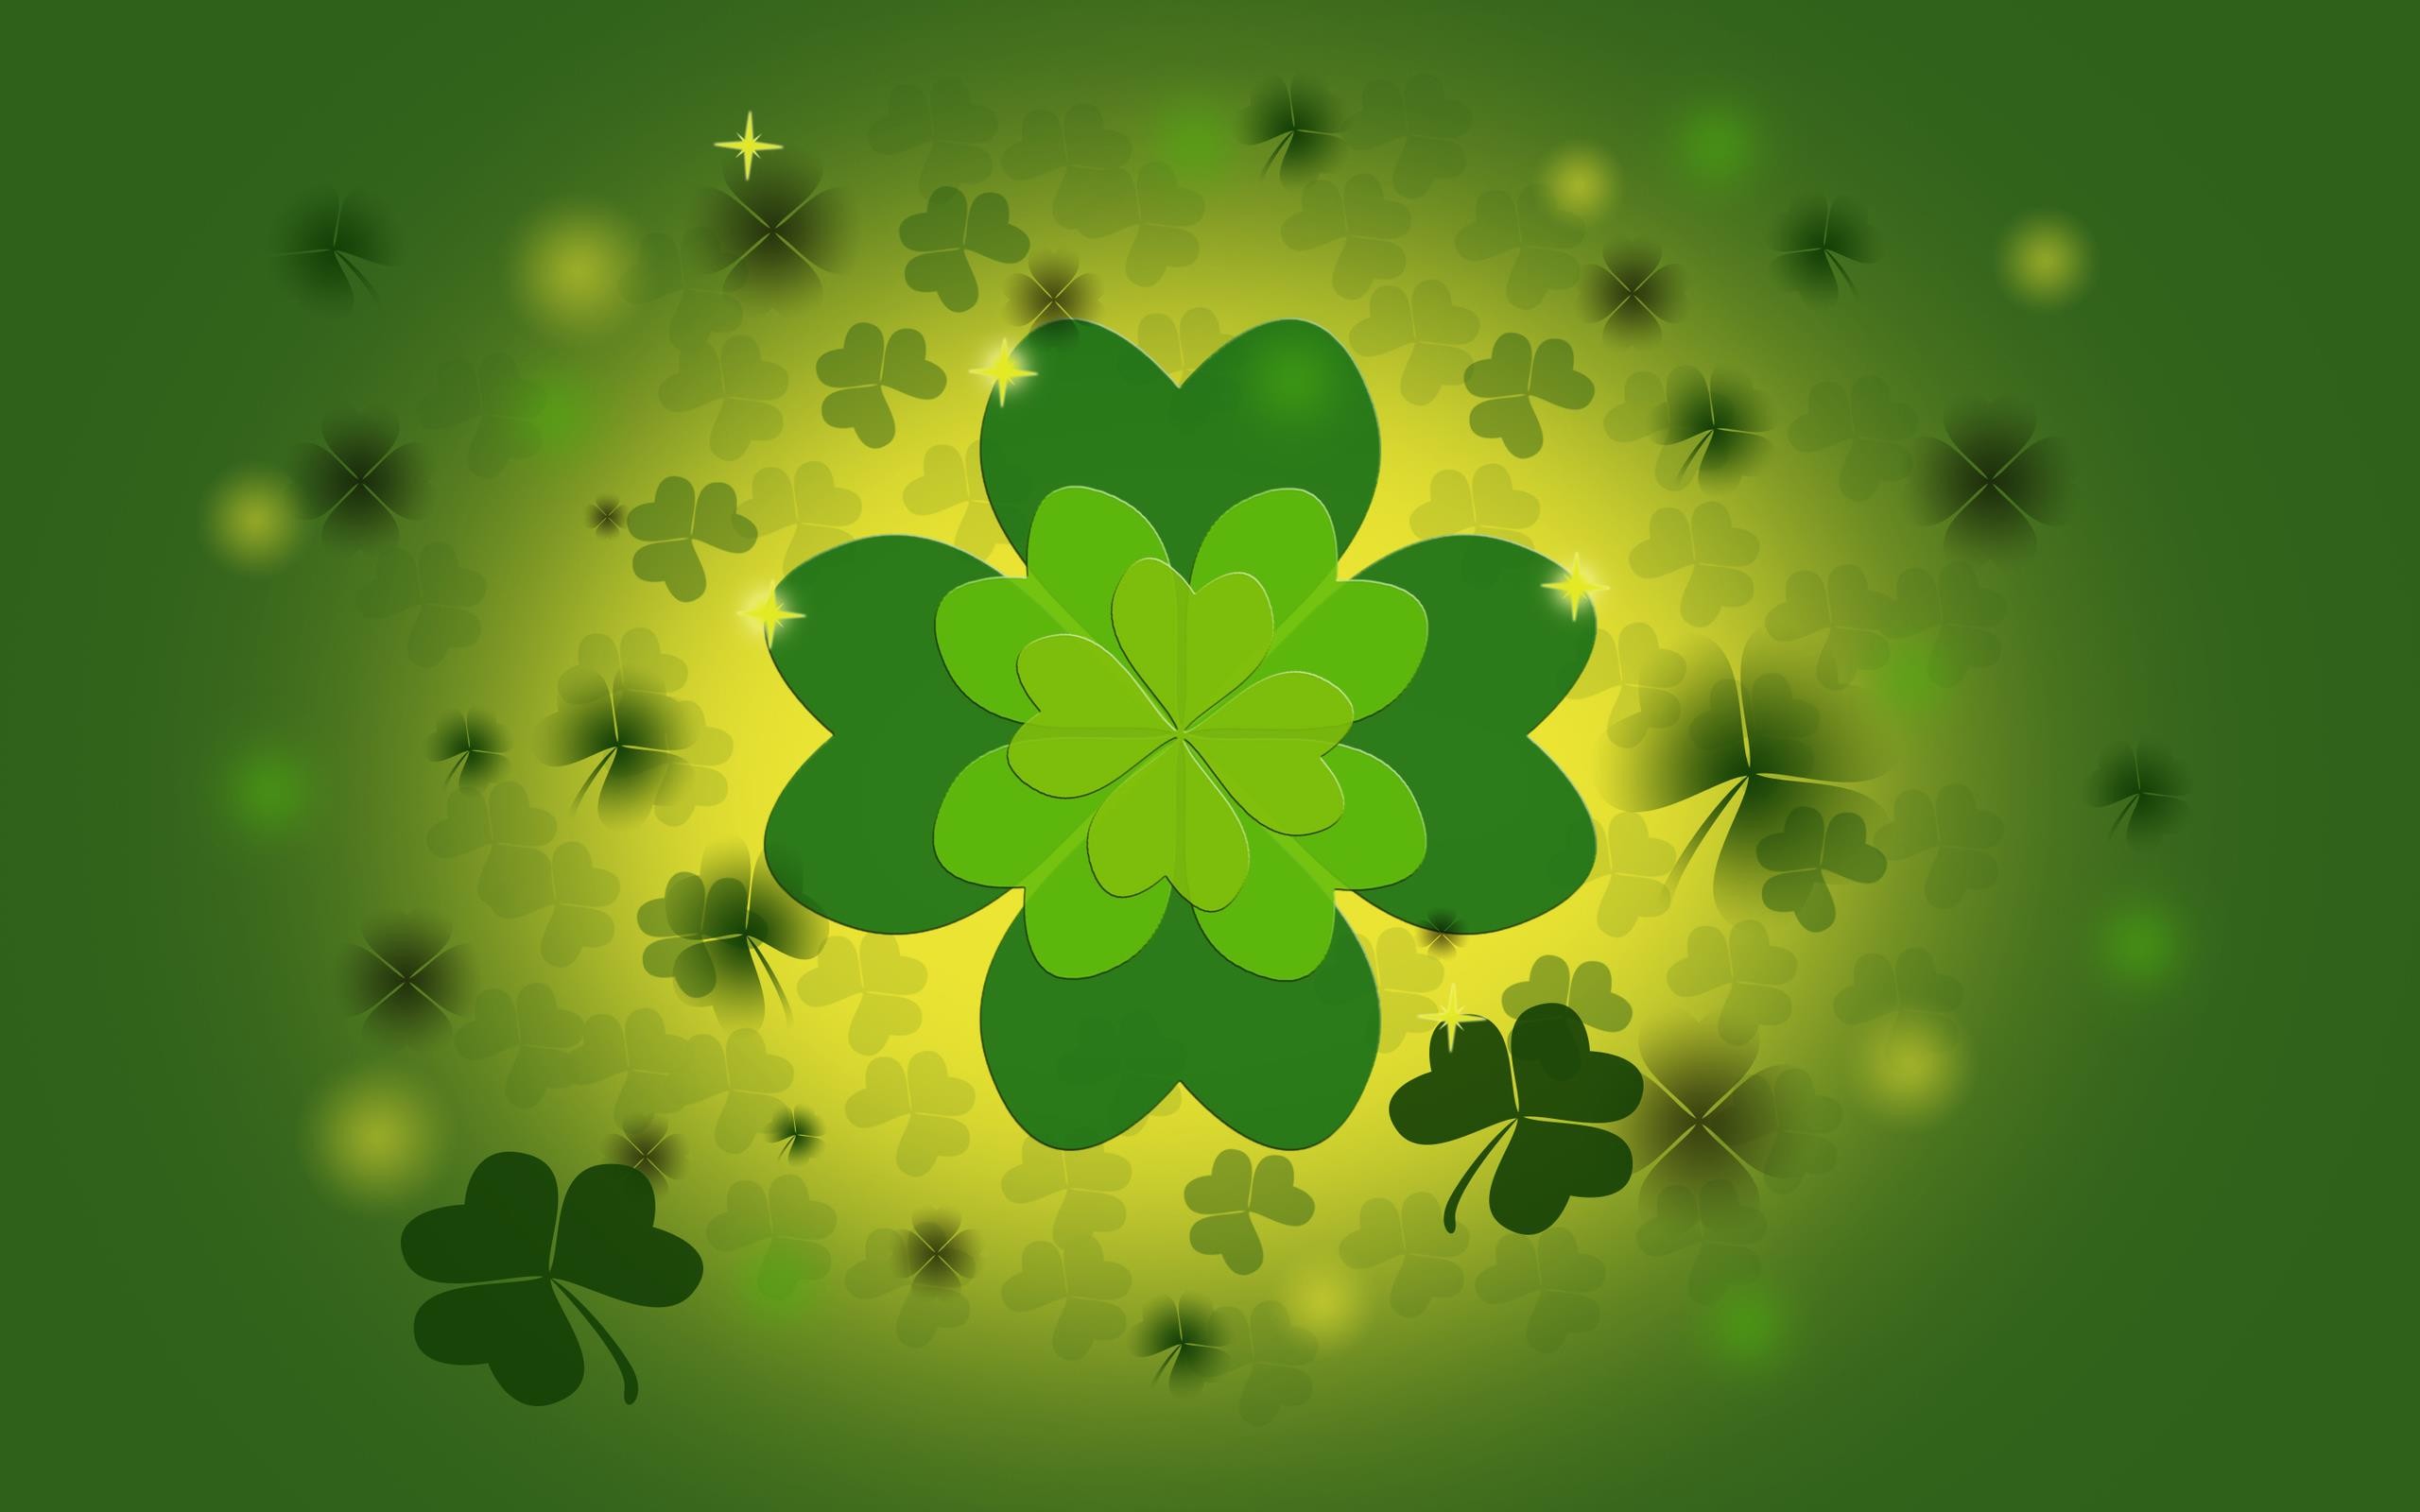 2560x1600 St Patricks Day Wallpapers HD St patricks day wallpapers hd photo screen